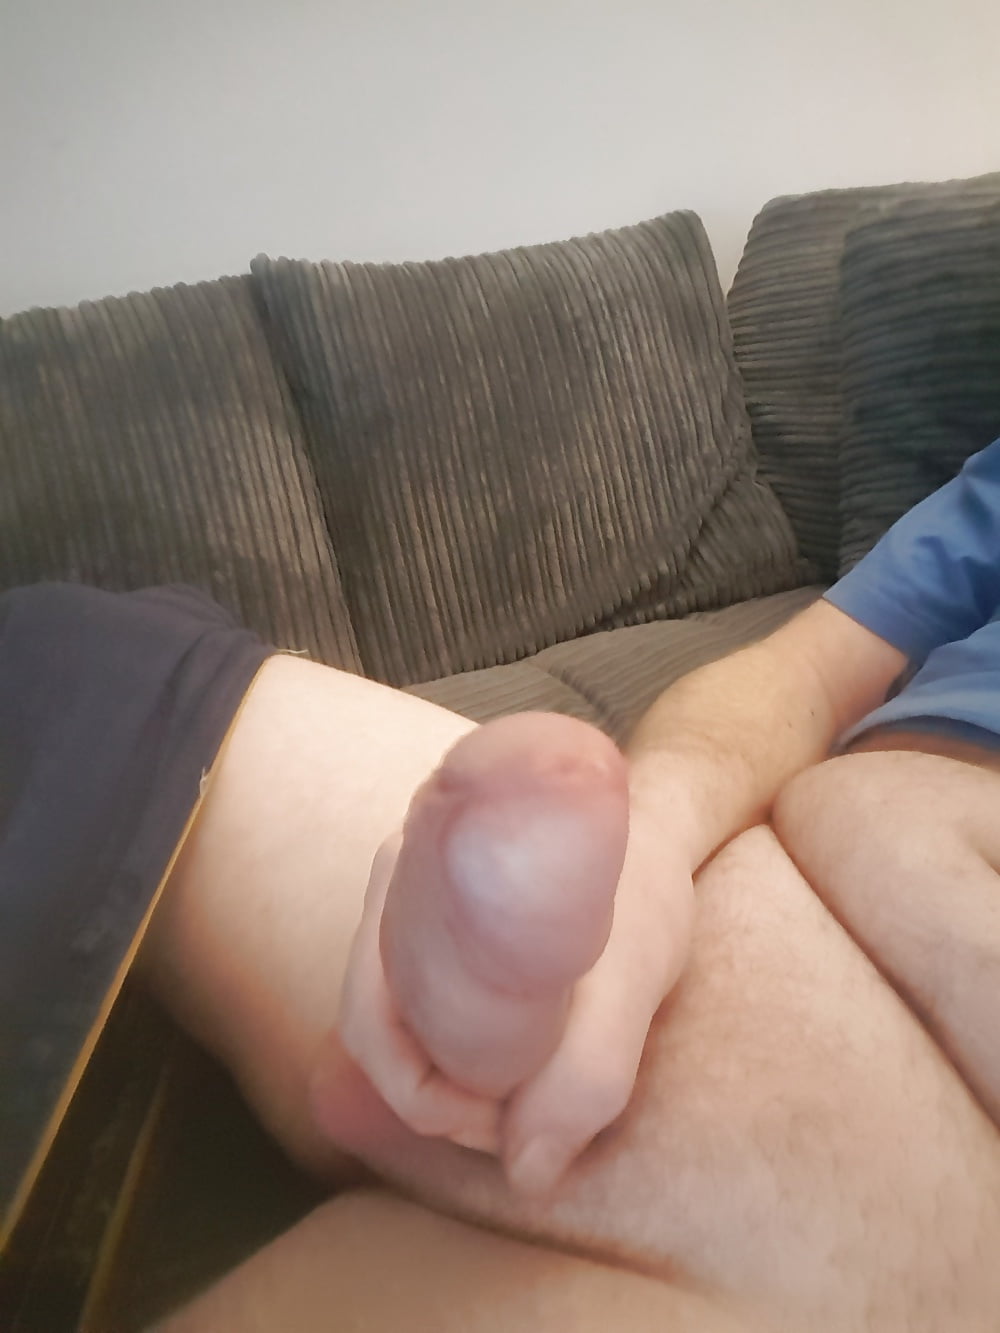 Pics of my hubby's cock before I sucked him dry adult photos